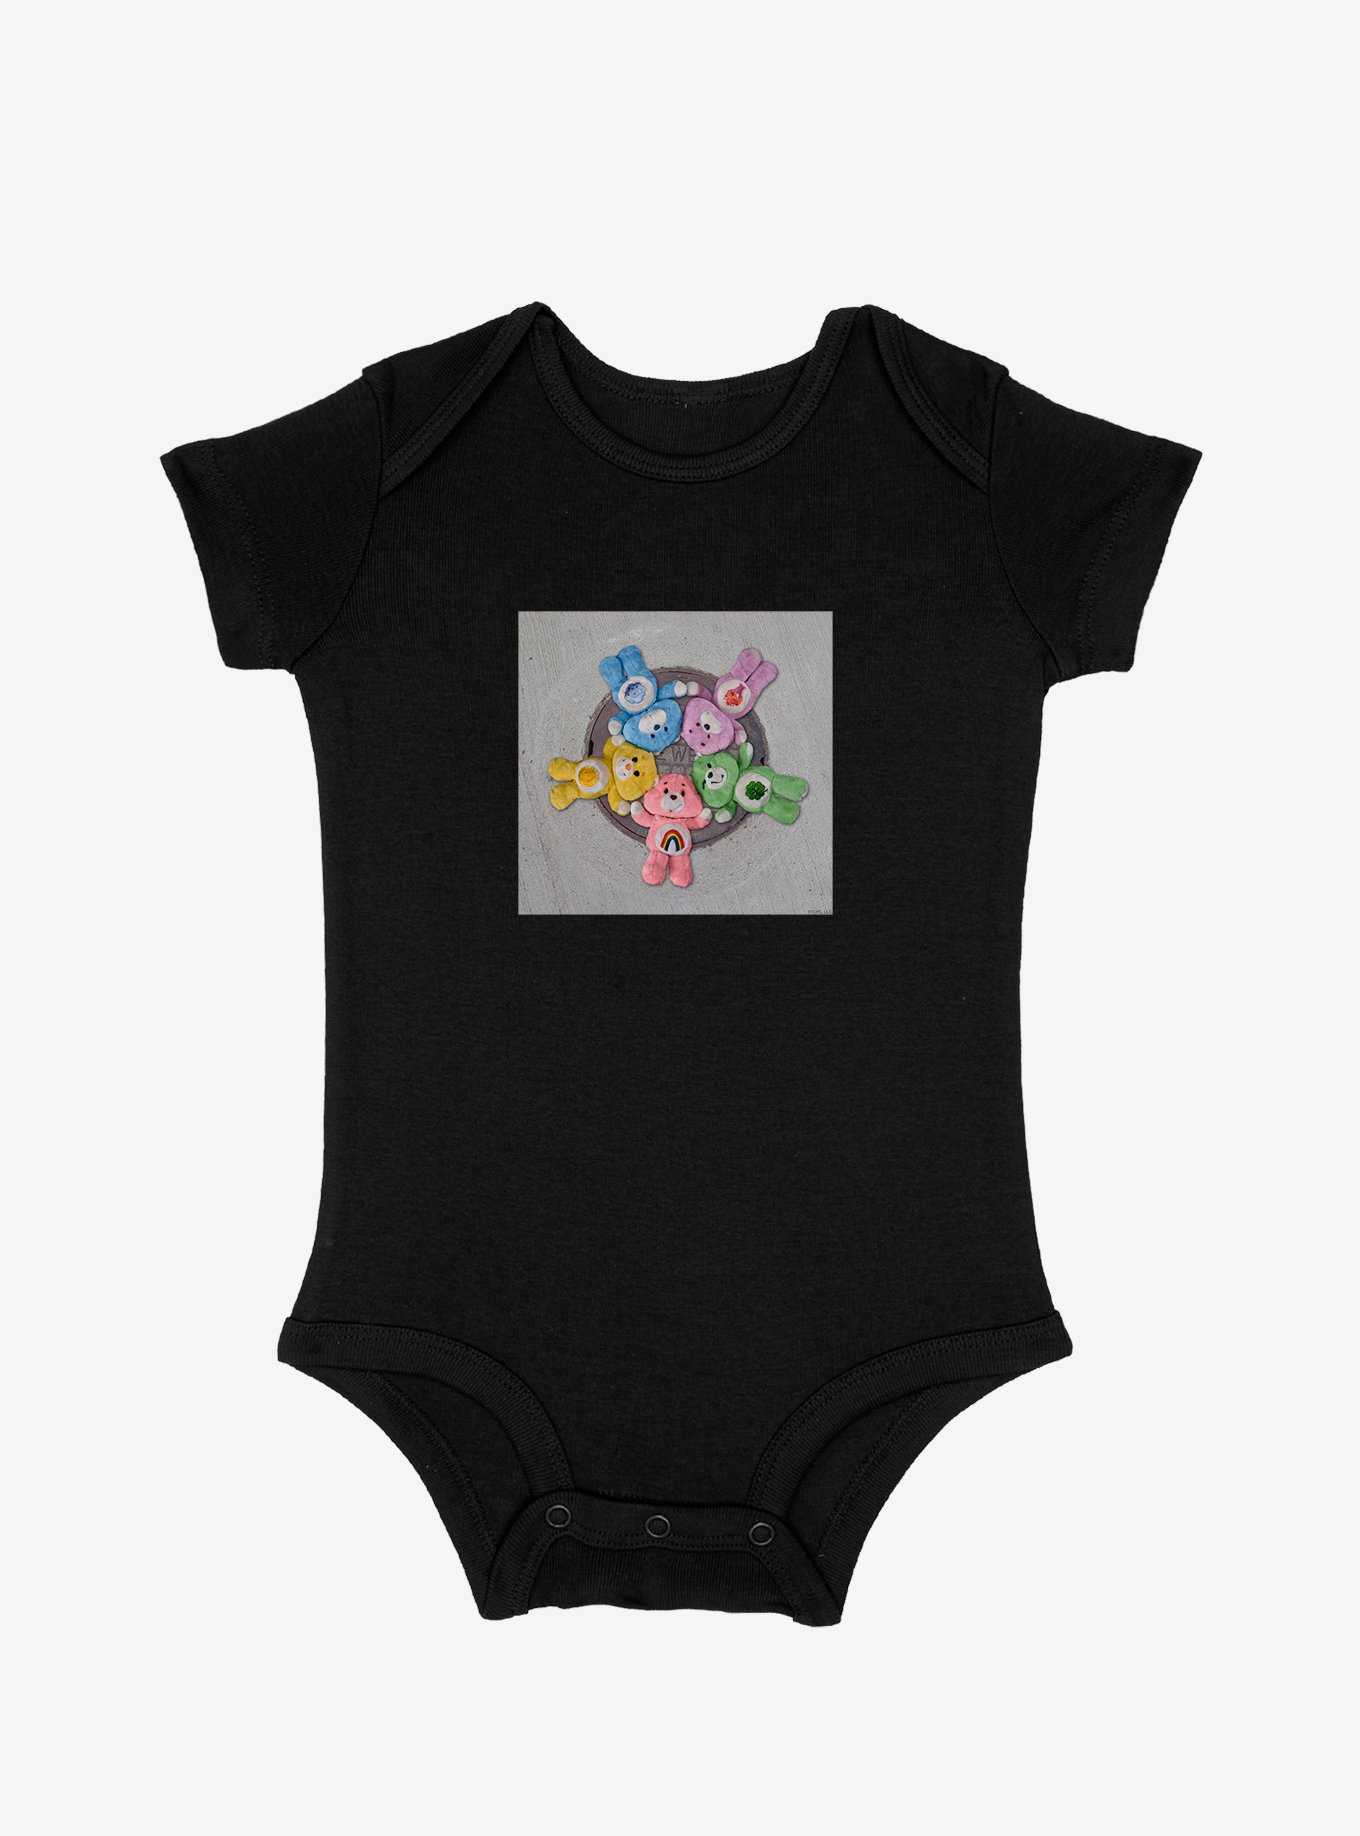 Care Bears Daydreaming Infant Bodysuit, , hi-res